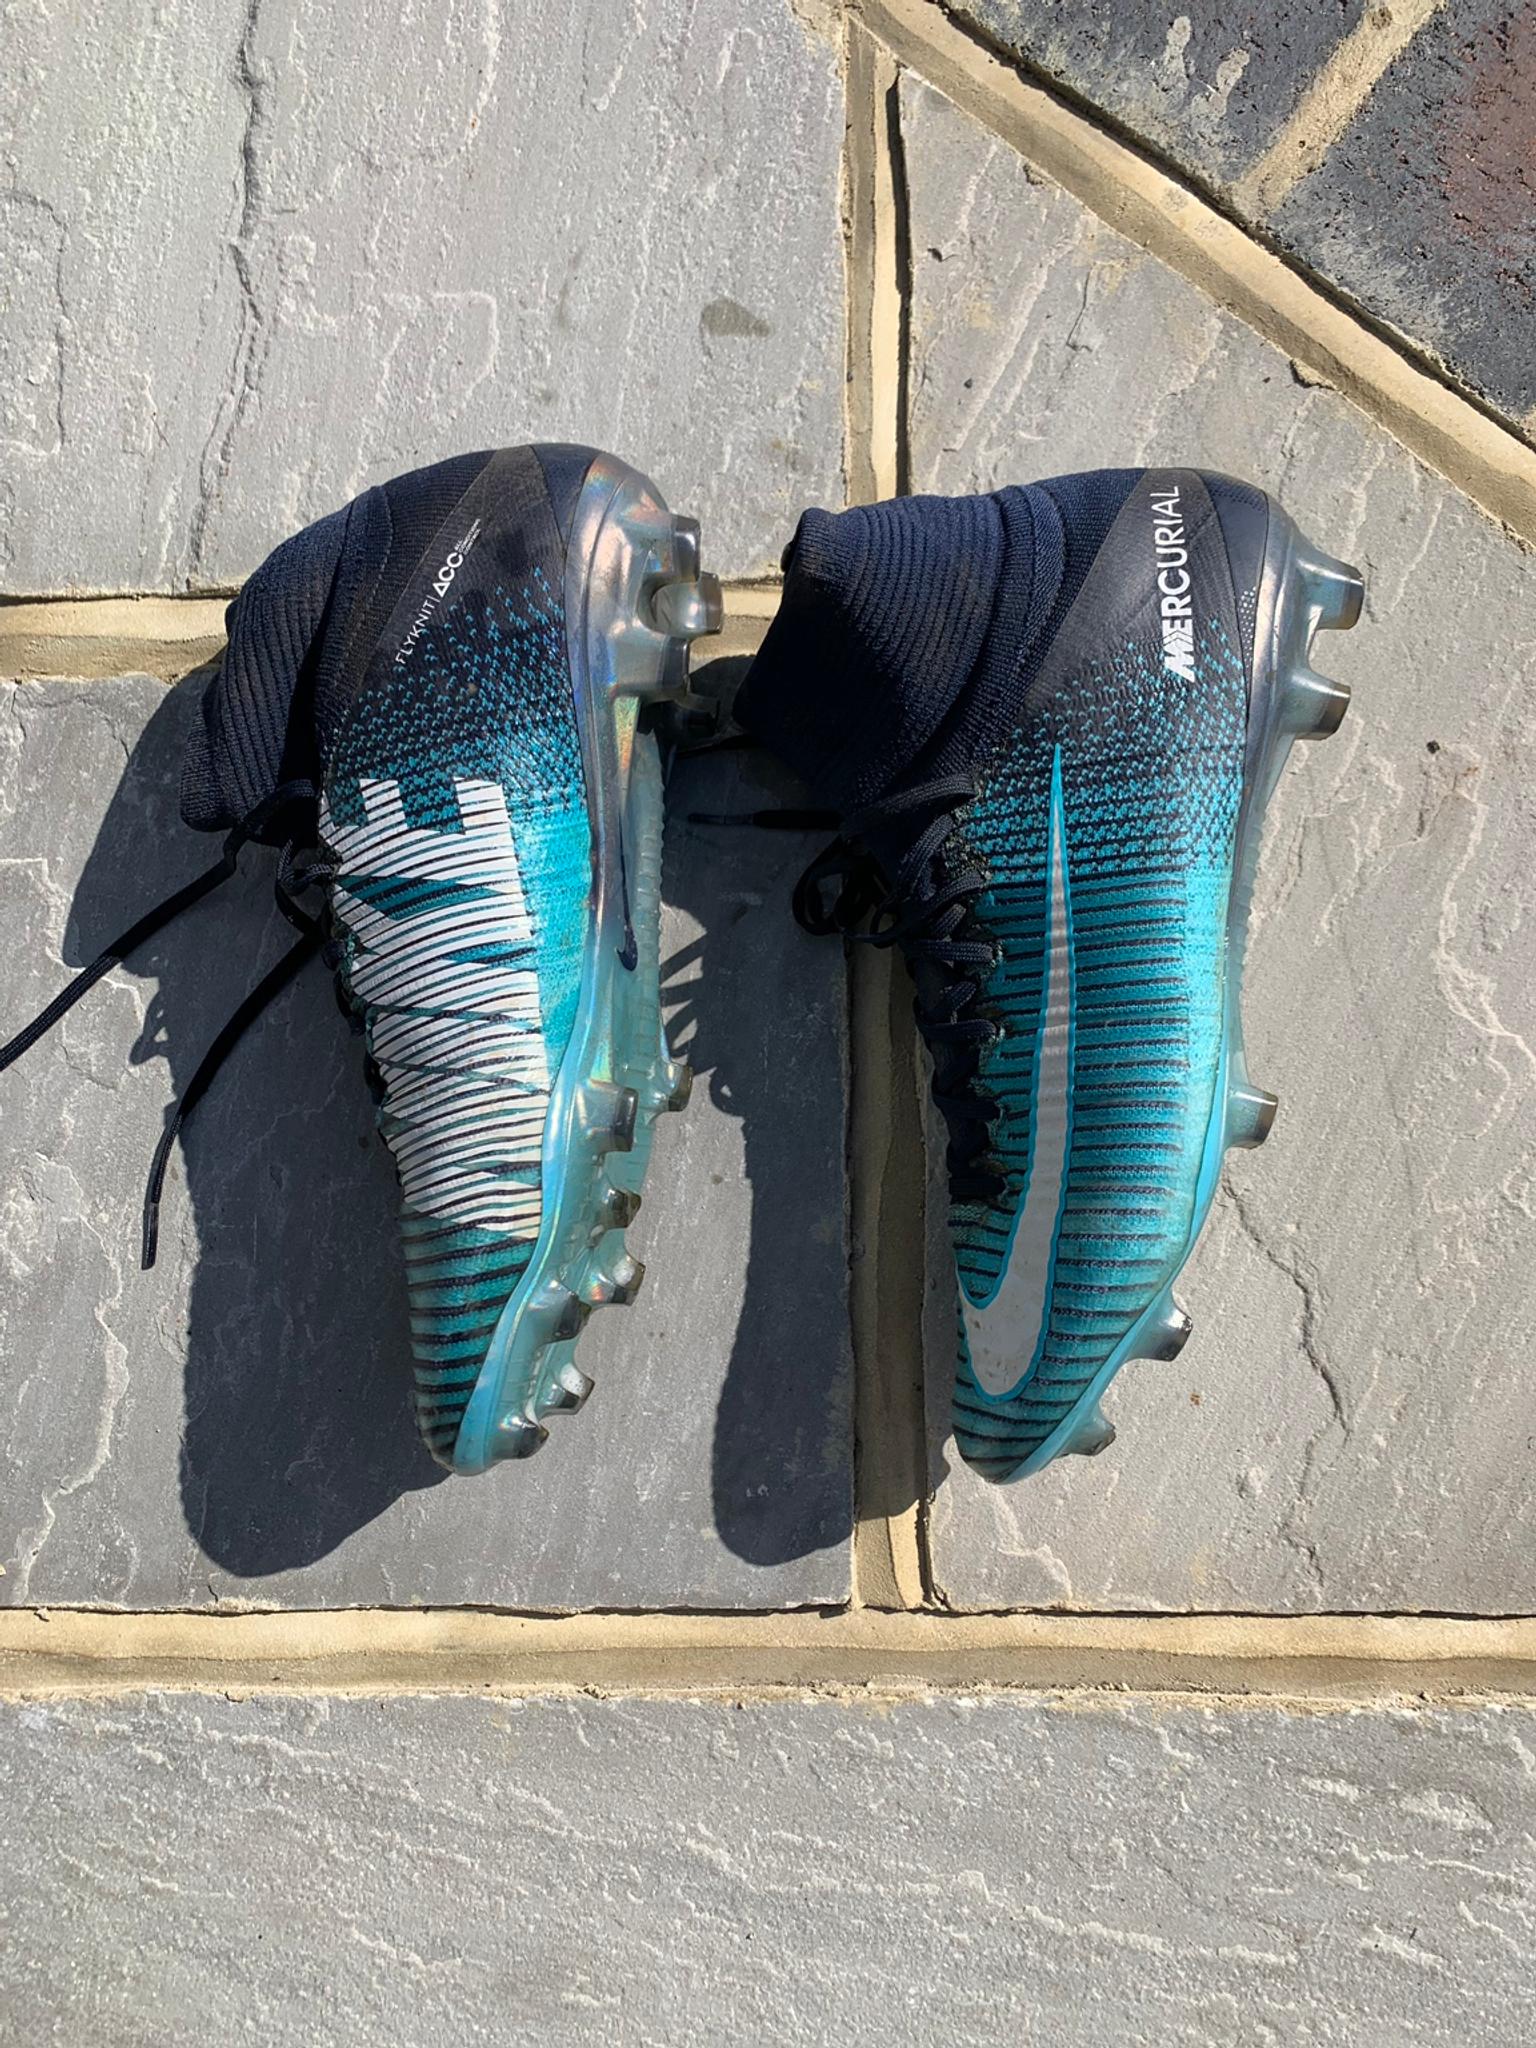 Nike Mercurial Vapour IV Superfly SG Size 10 Nike Mercurial